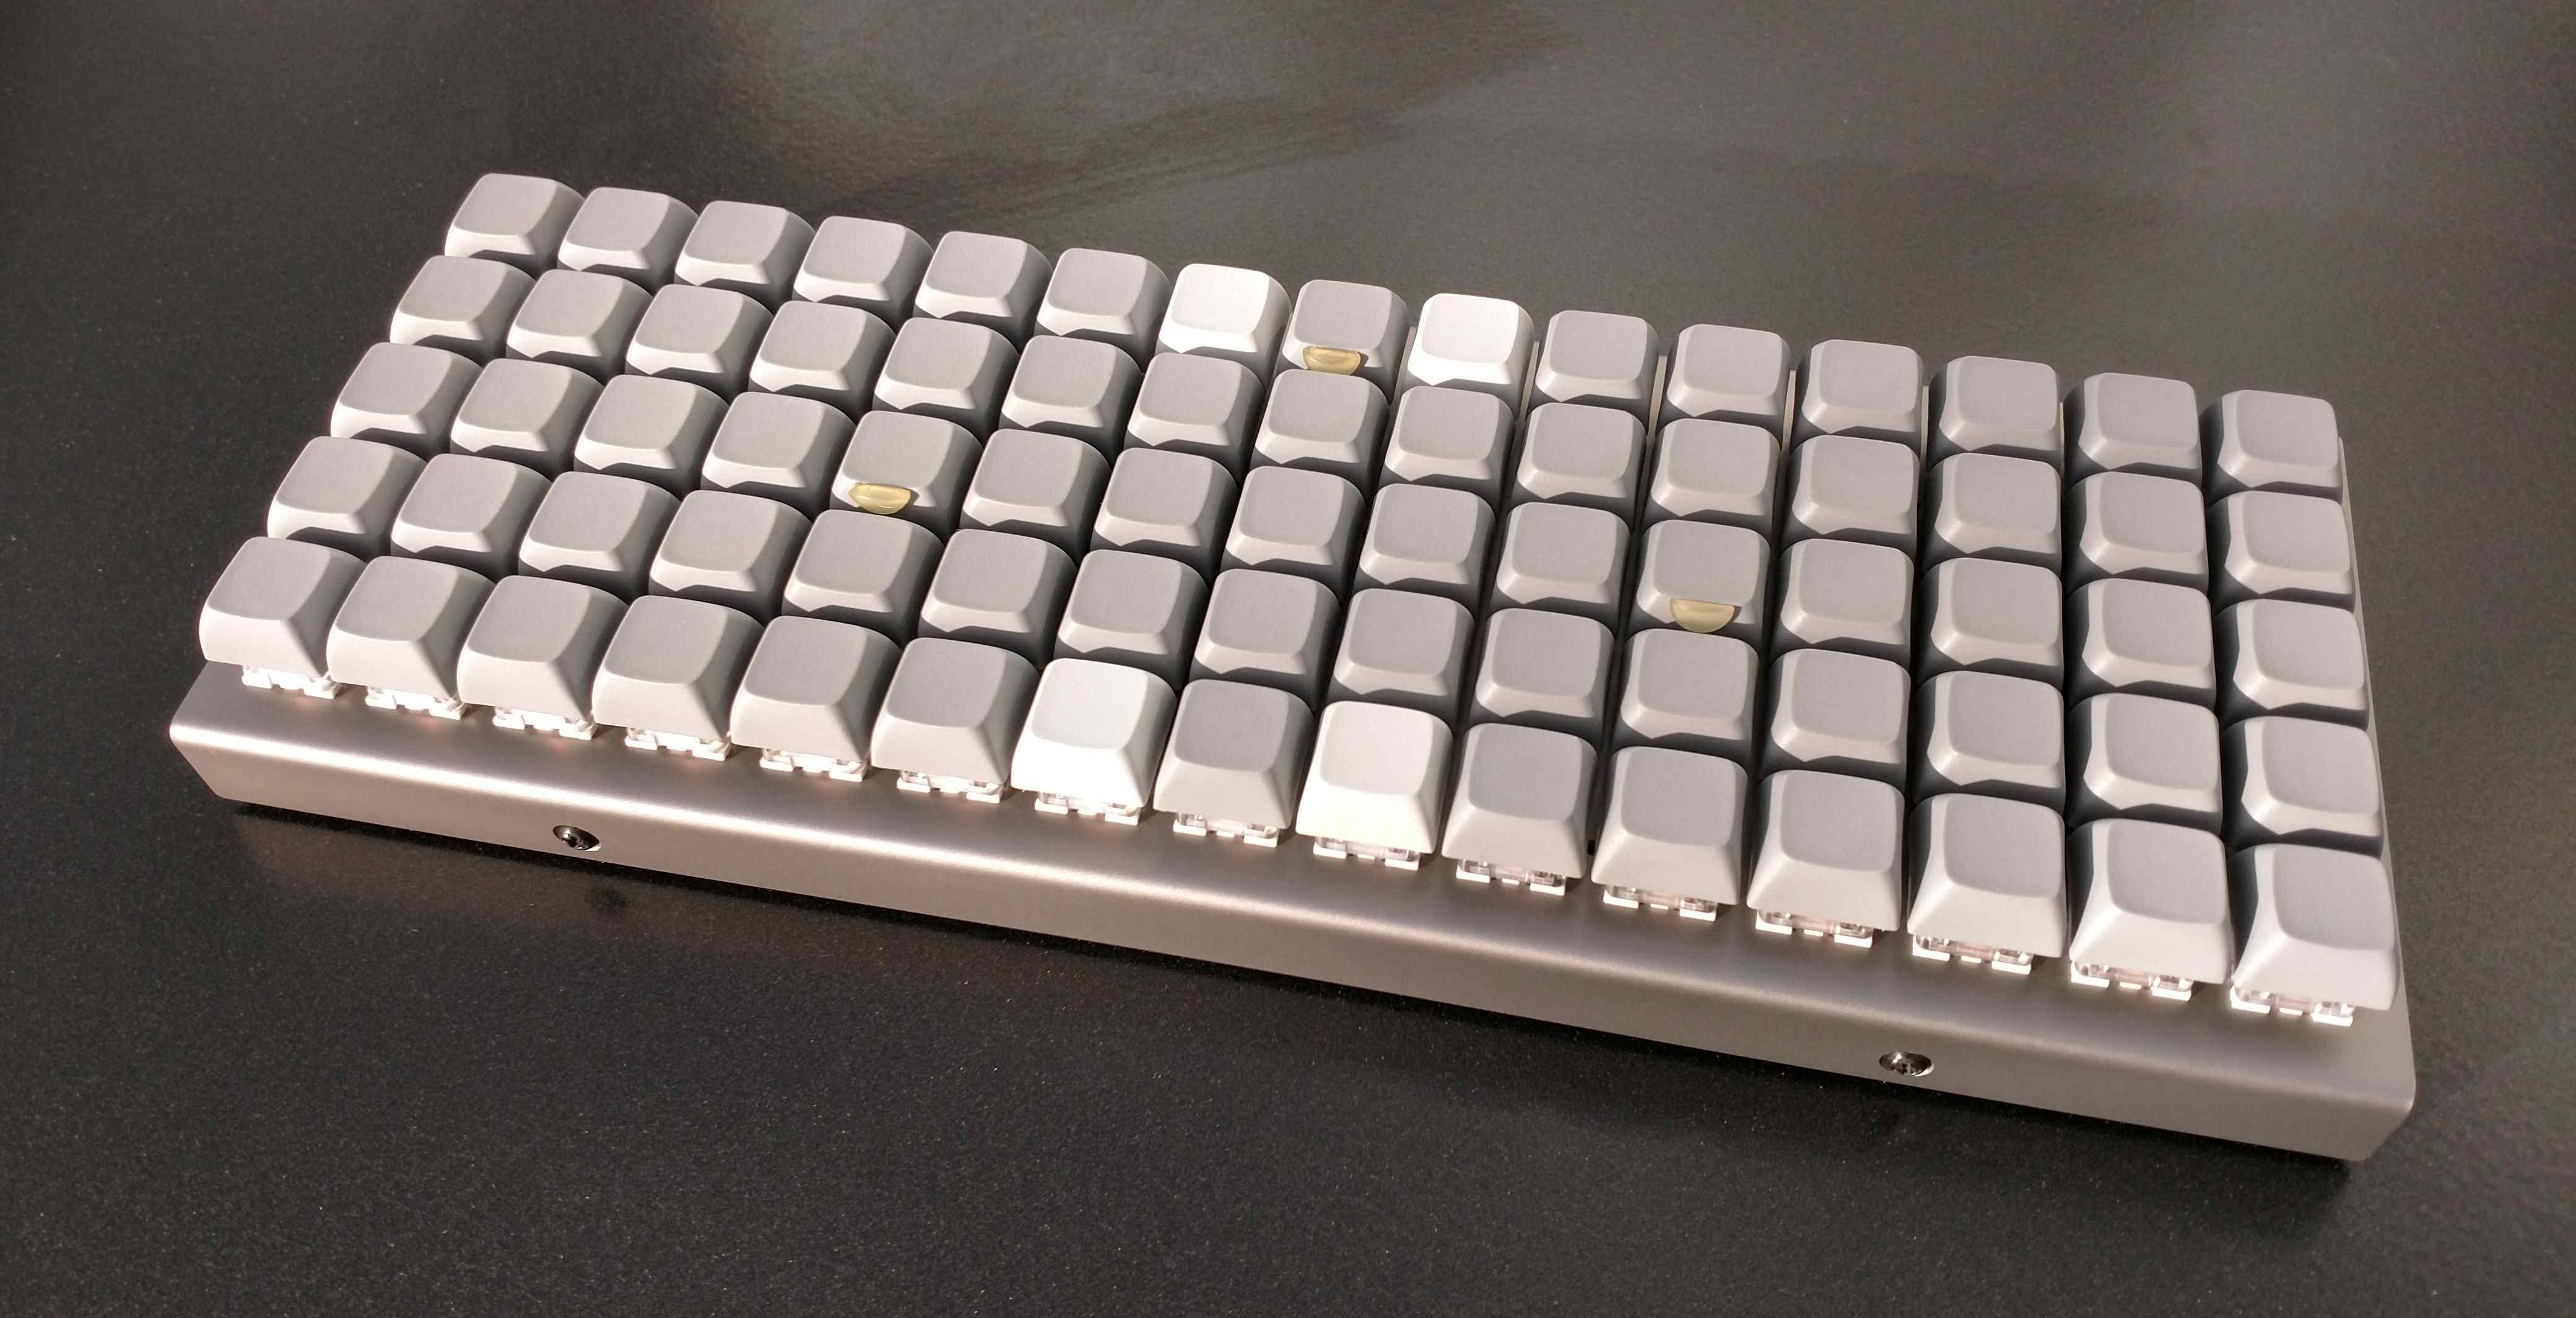 XD75 featuring an even more suprisingly creative and beautiful pattern of gray and white XDA keycaps.